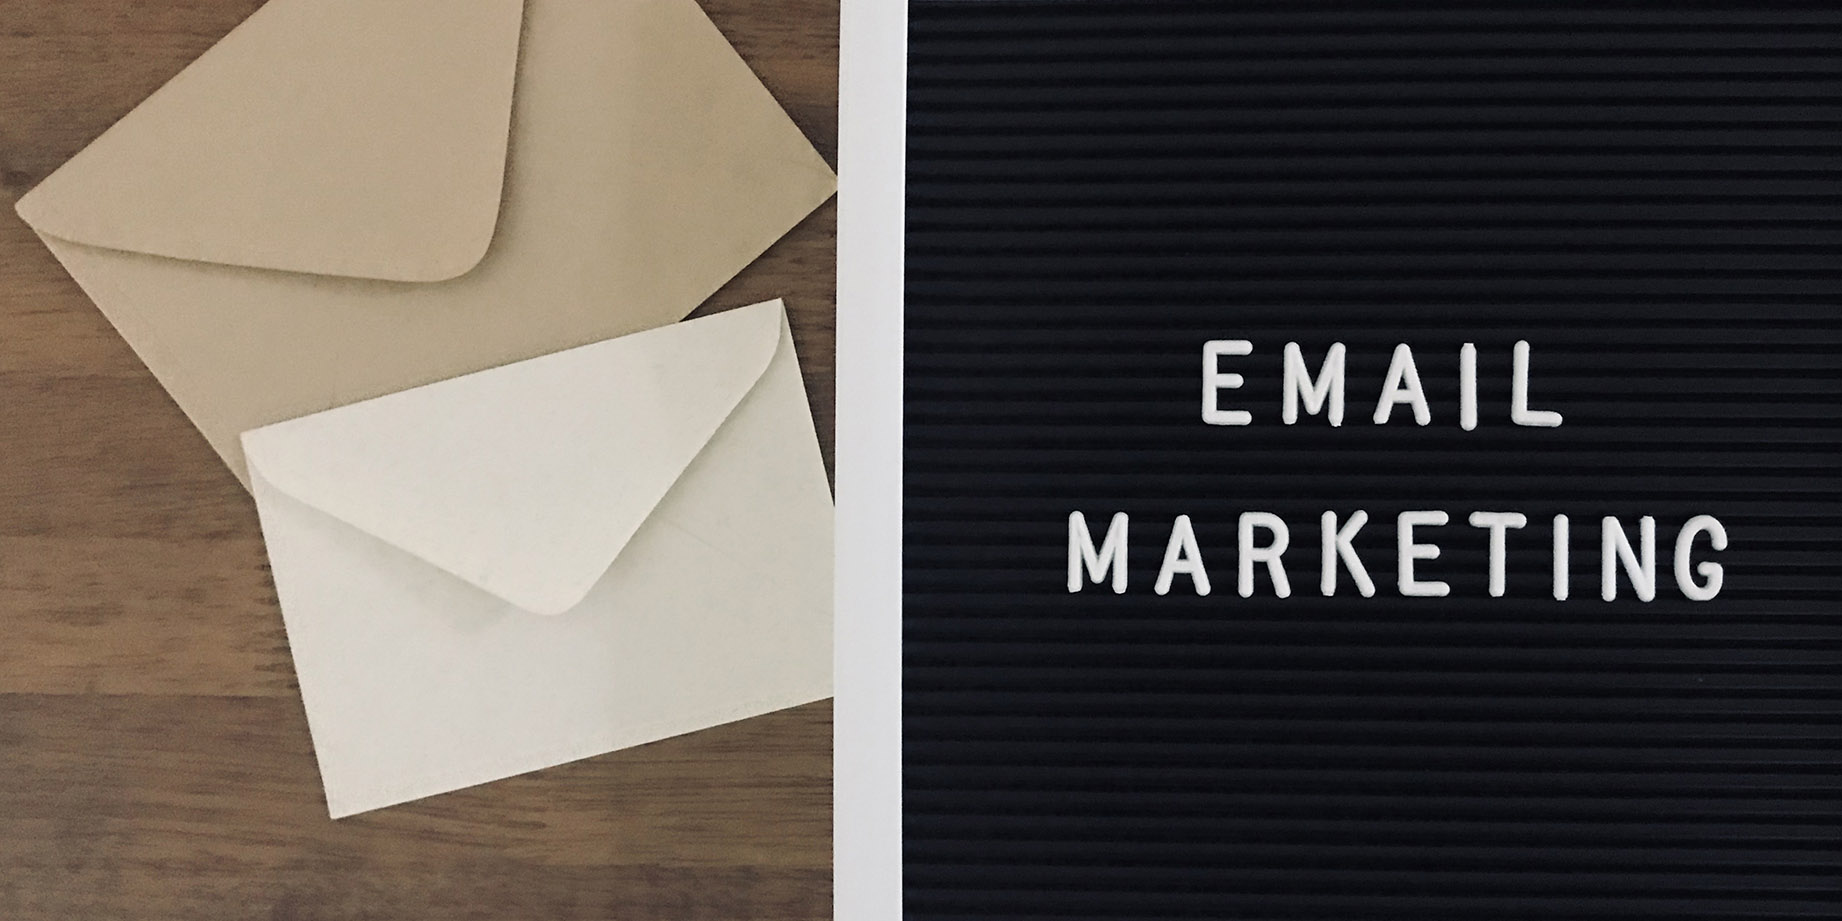 Email Marketing Do’s and Don’ts